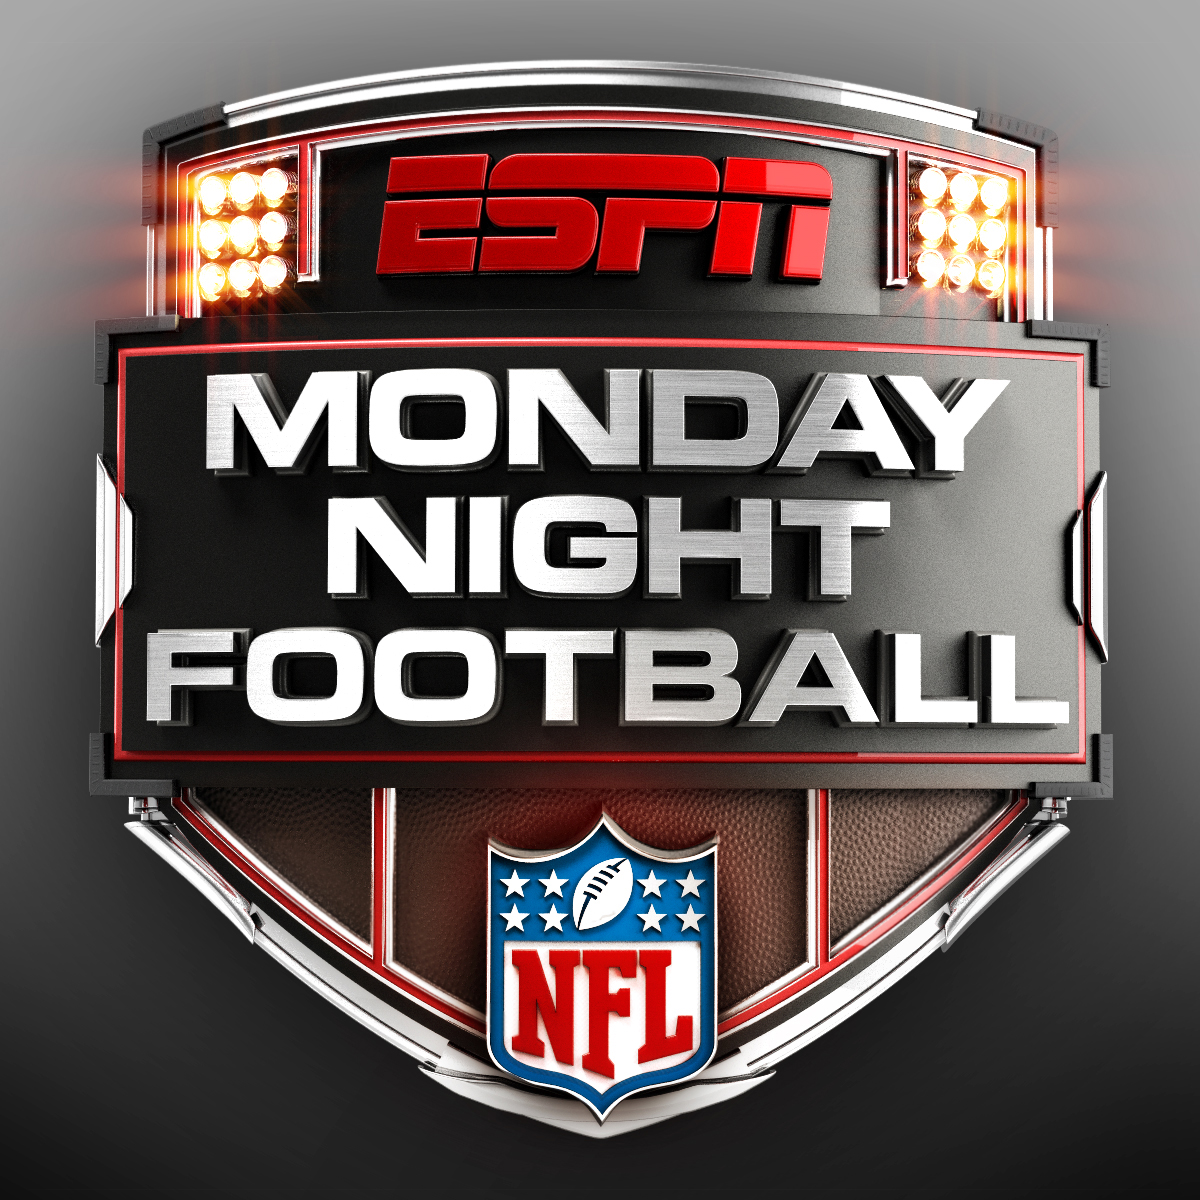 what channel monday night football on tonight